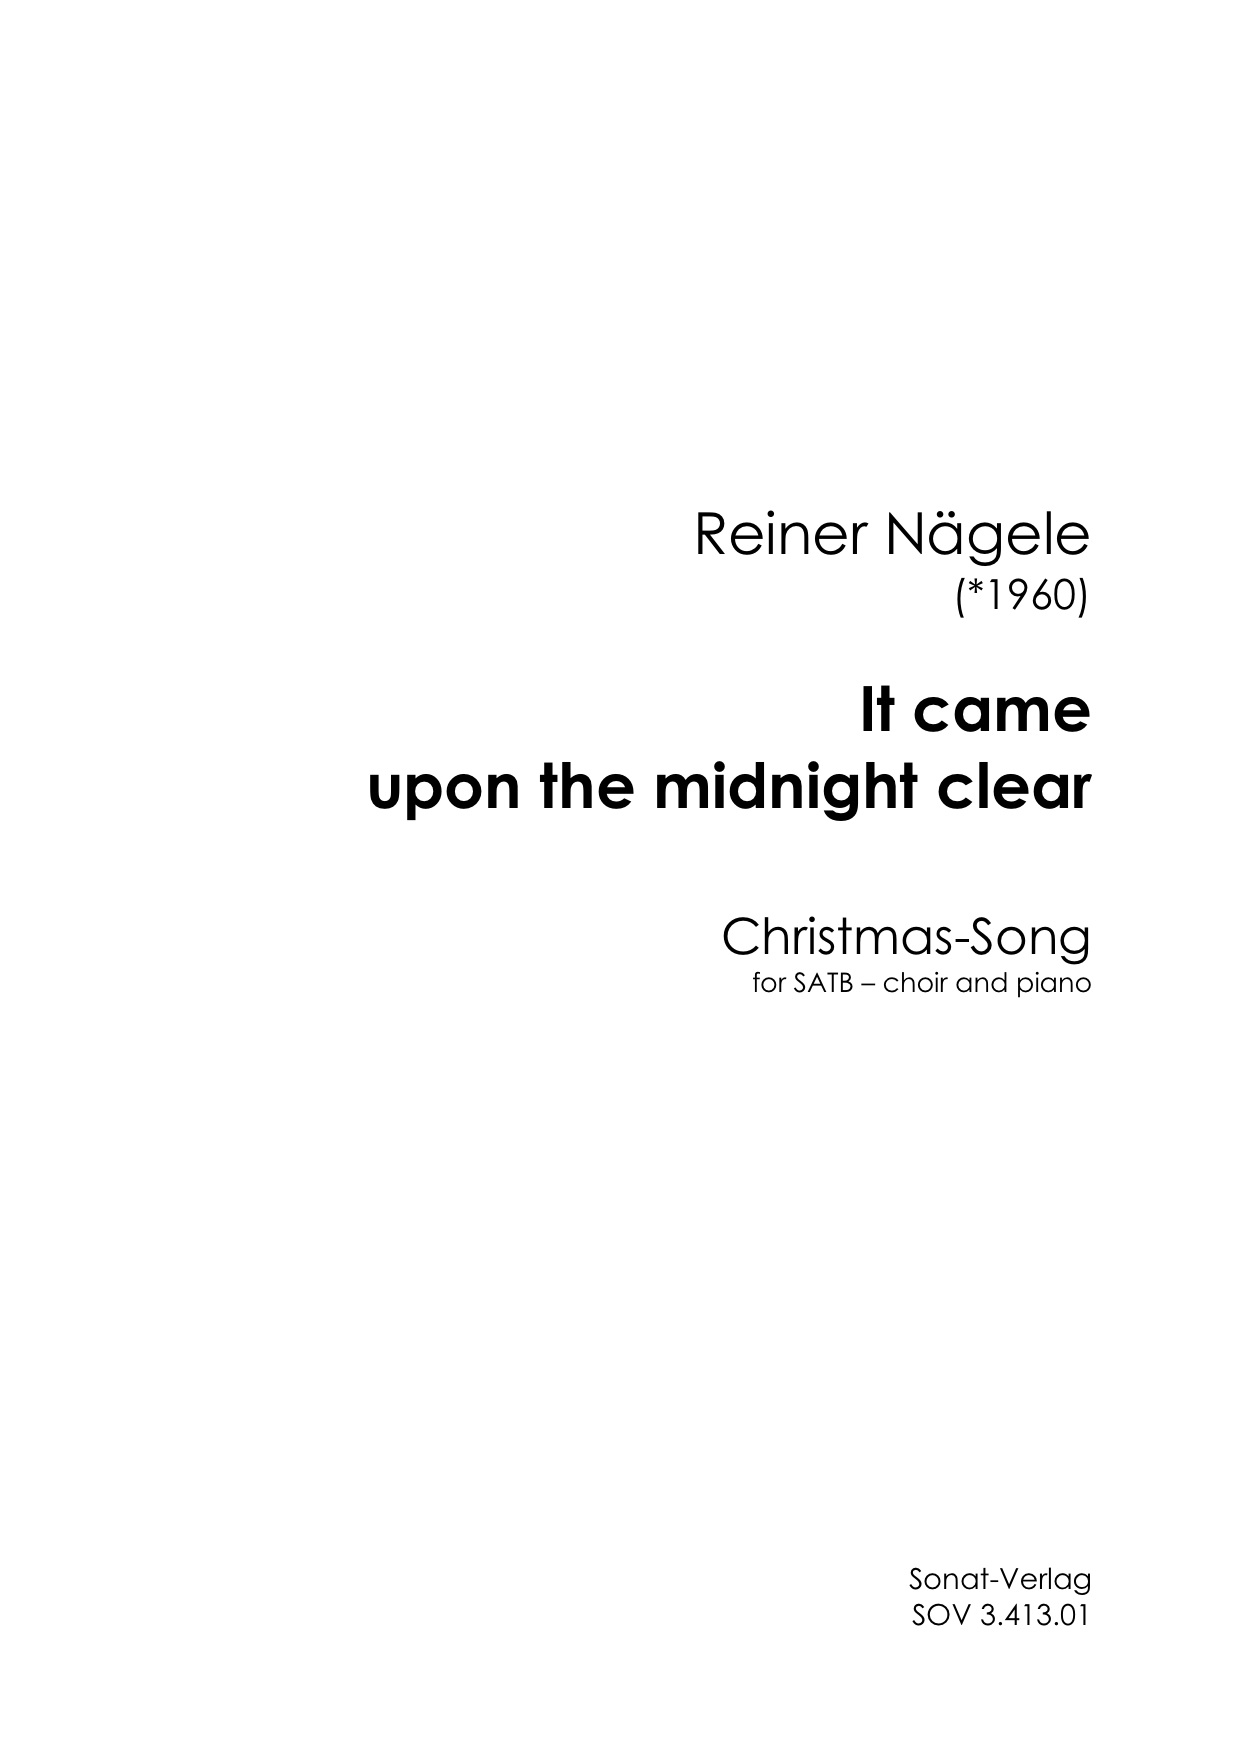 Nägele, Reiner: It came upon the midnight clear (Part)